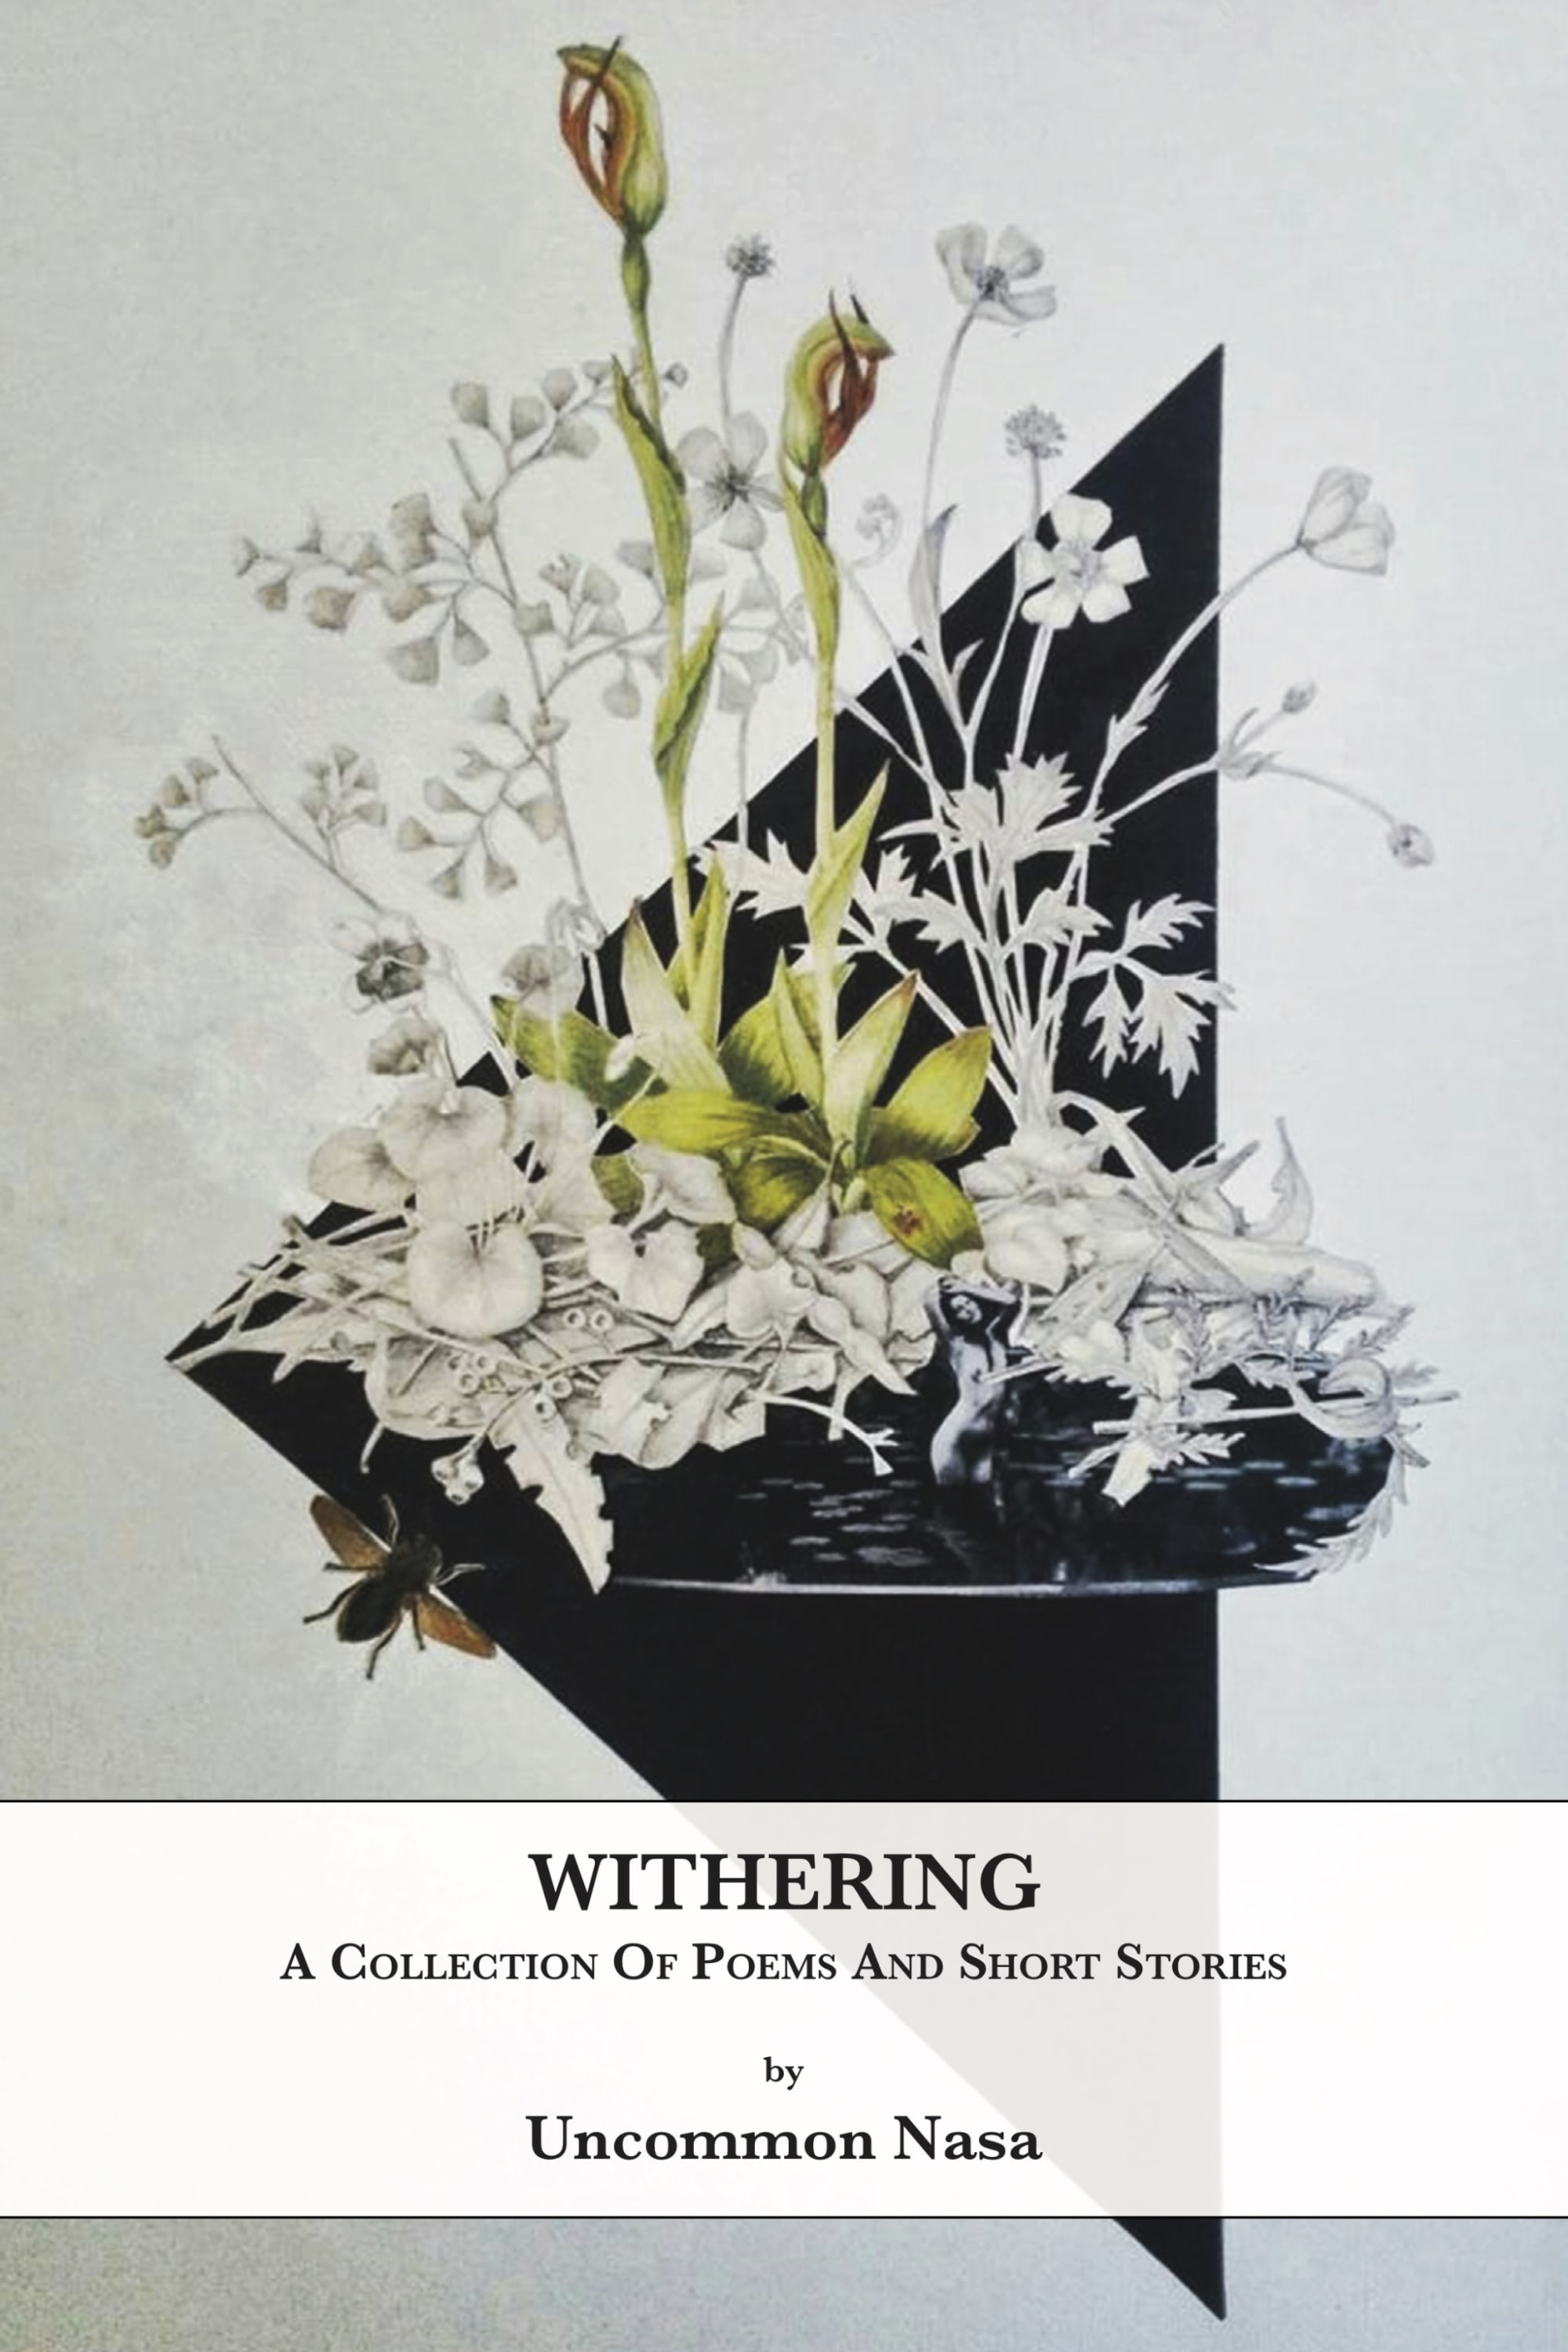 Withering [2018]